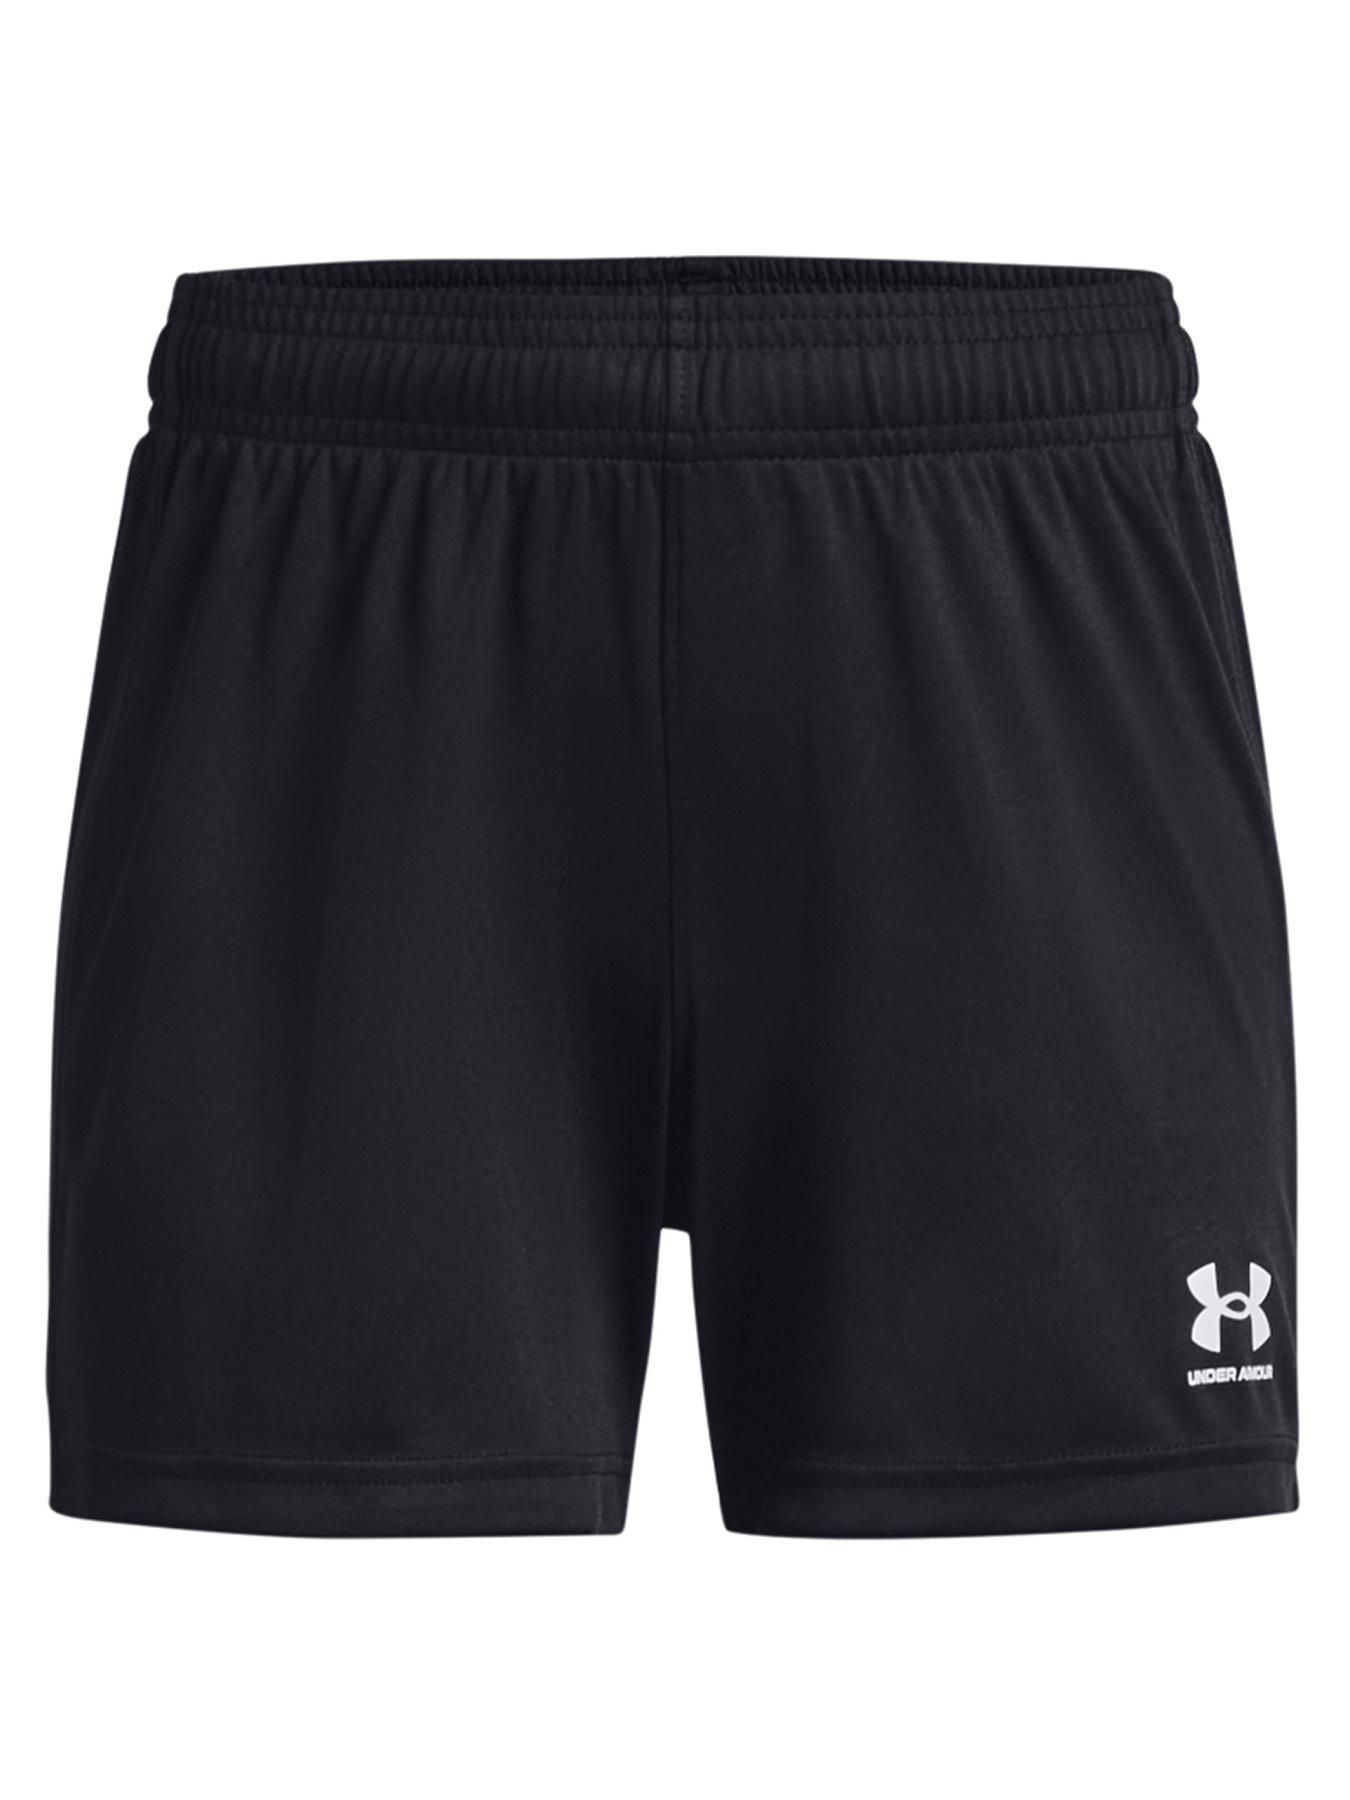 Under Armour Challenger shorts with side stripe in black